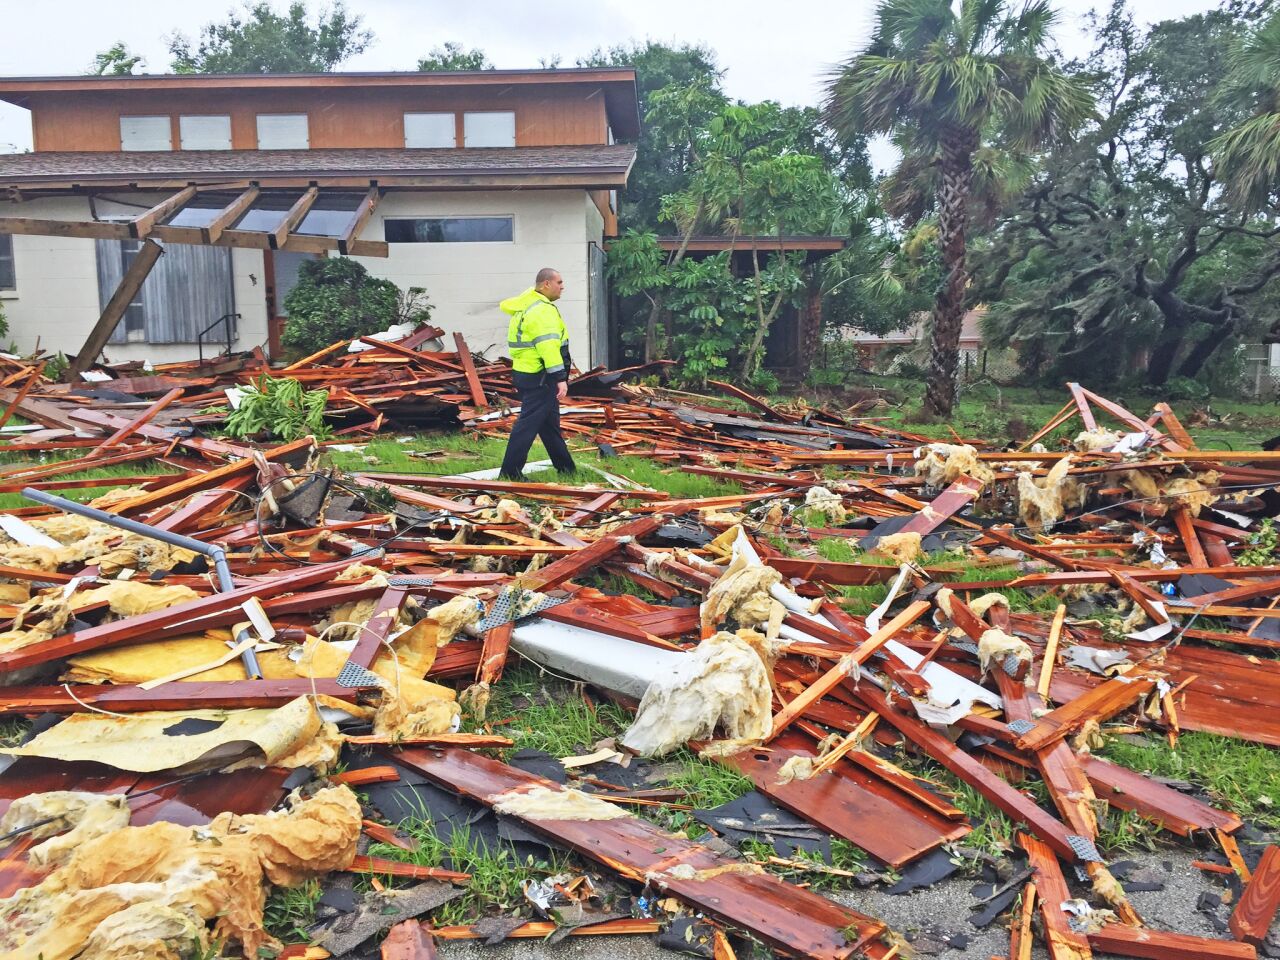 Dustin Terkoski, Palm Bay Police officer surveys the scene after a possible tornado touched down at Palm Pam Bay Estates.